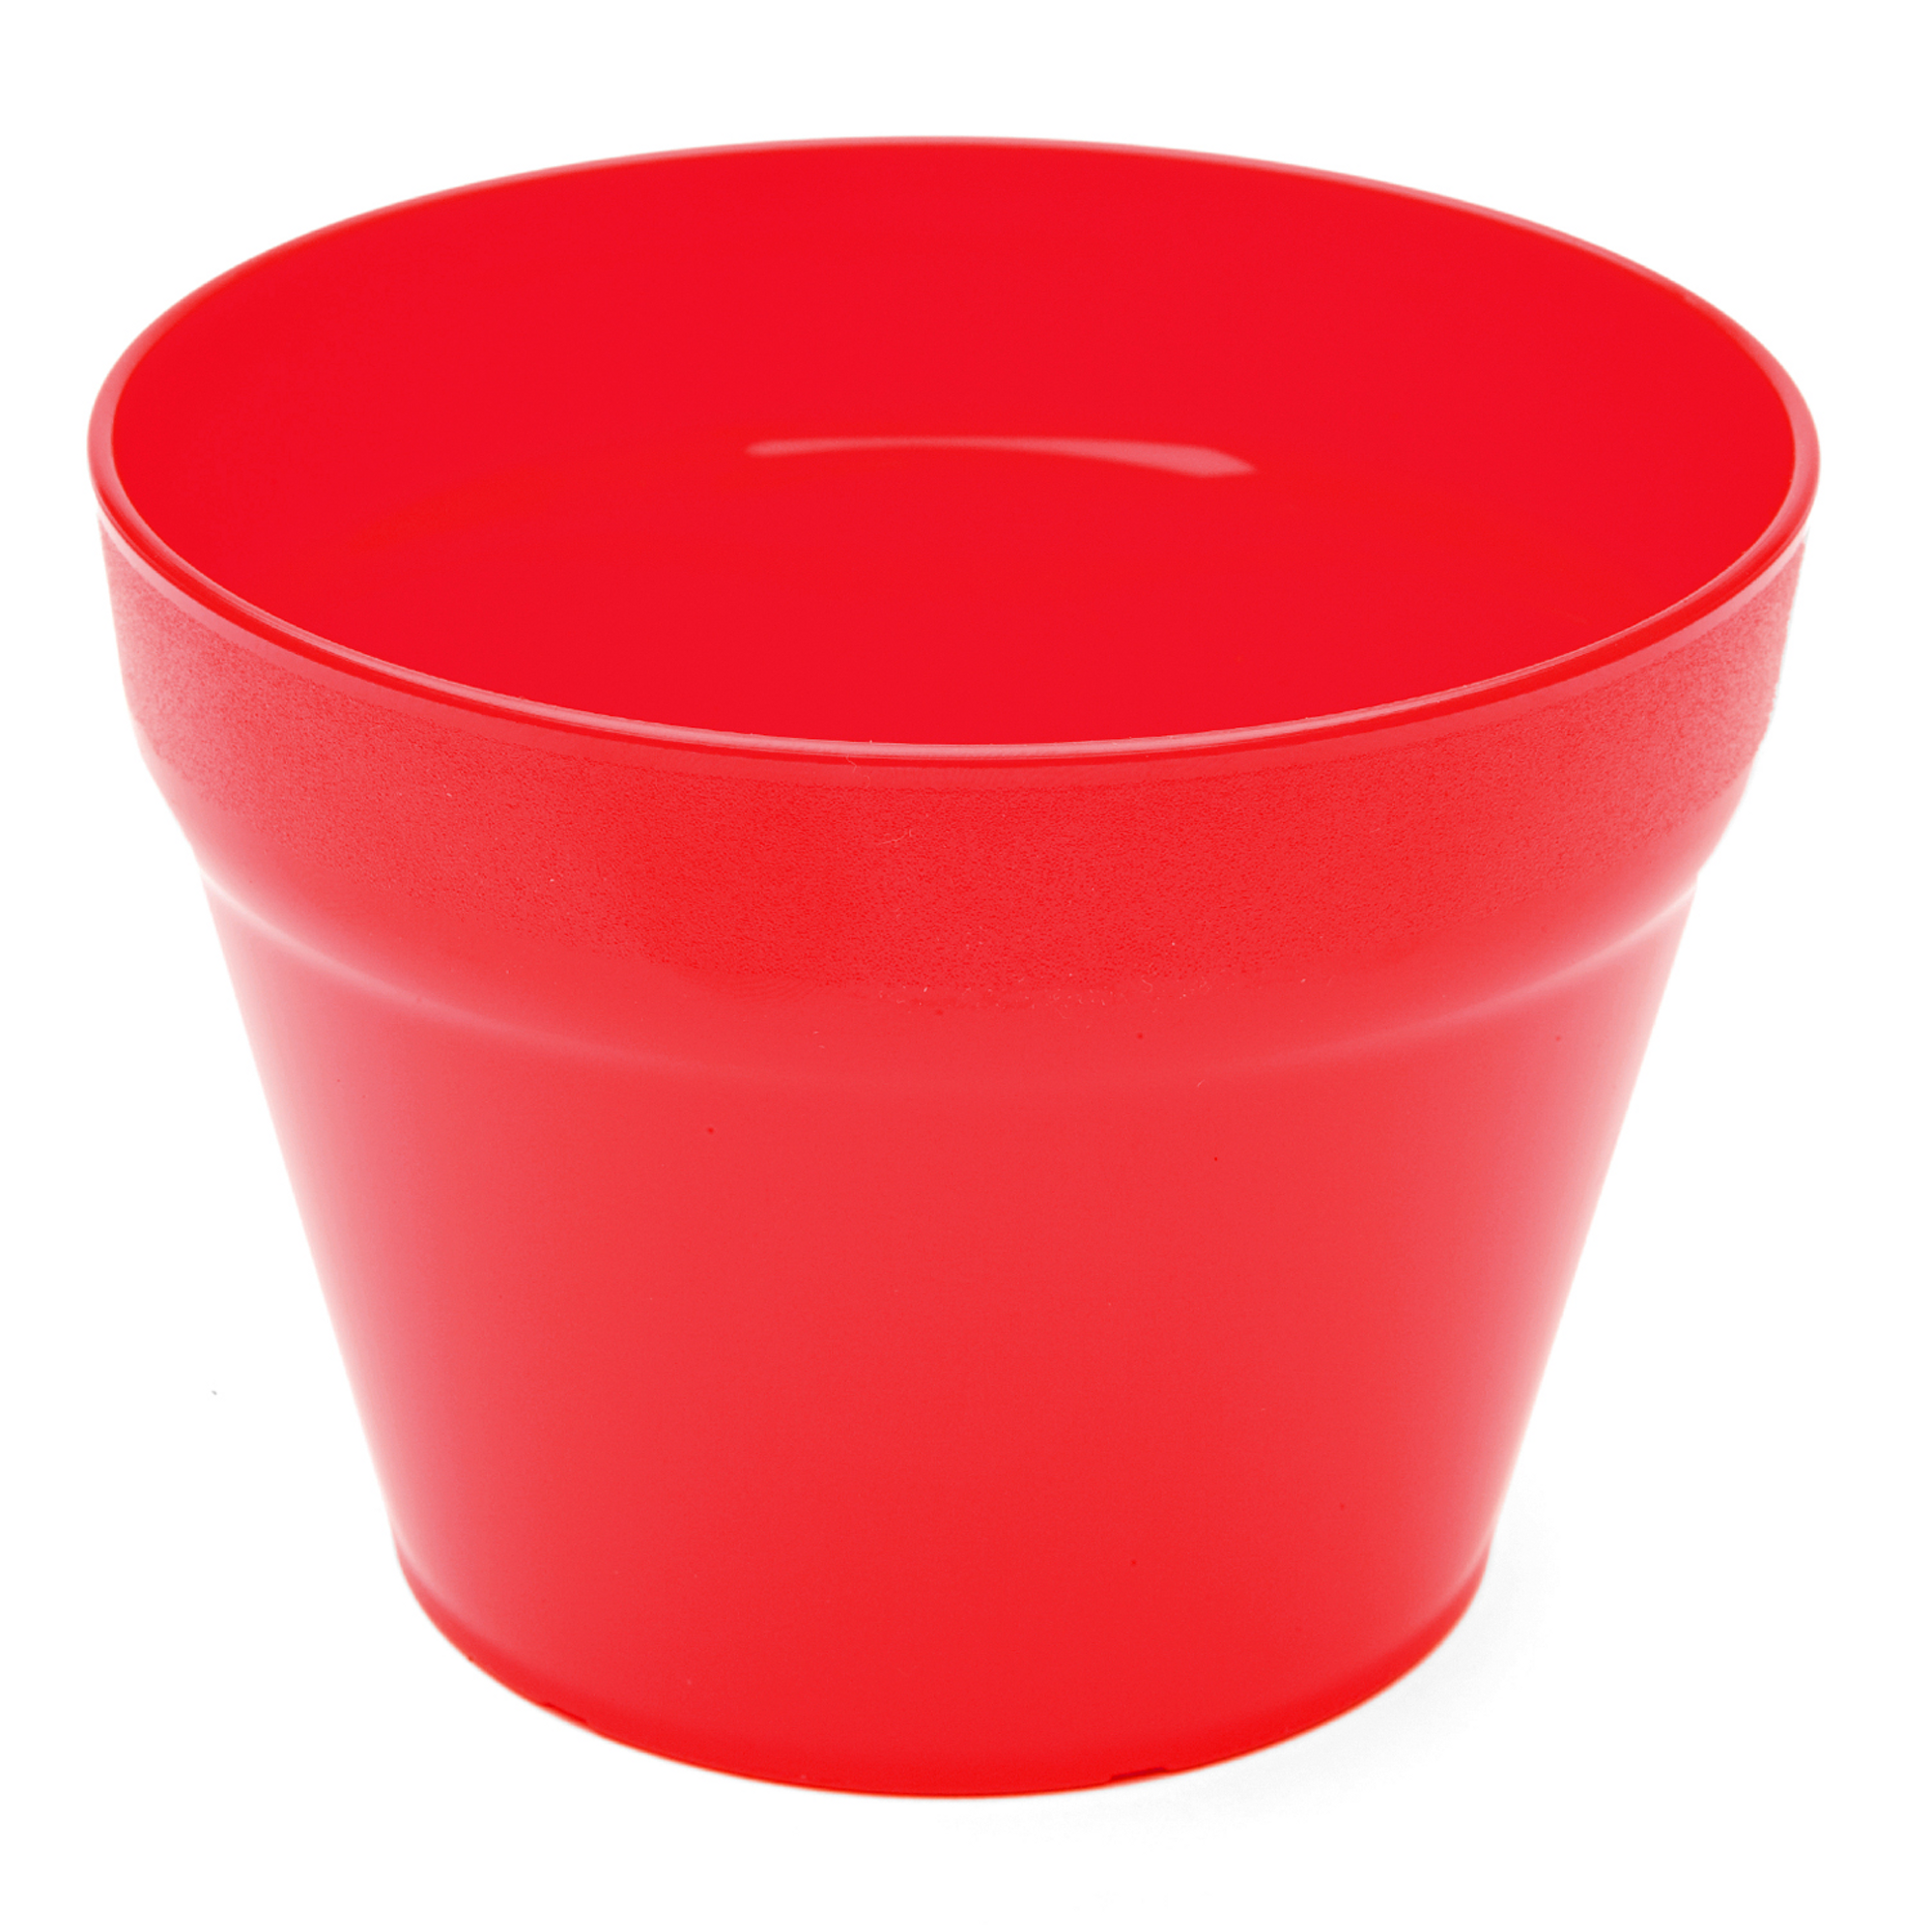 Harfield Multipot - Red